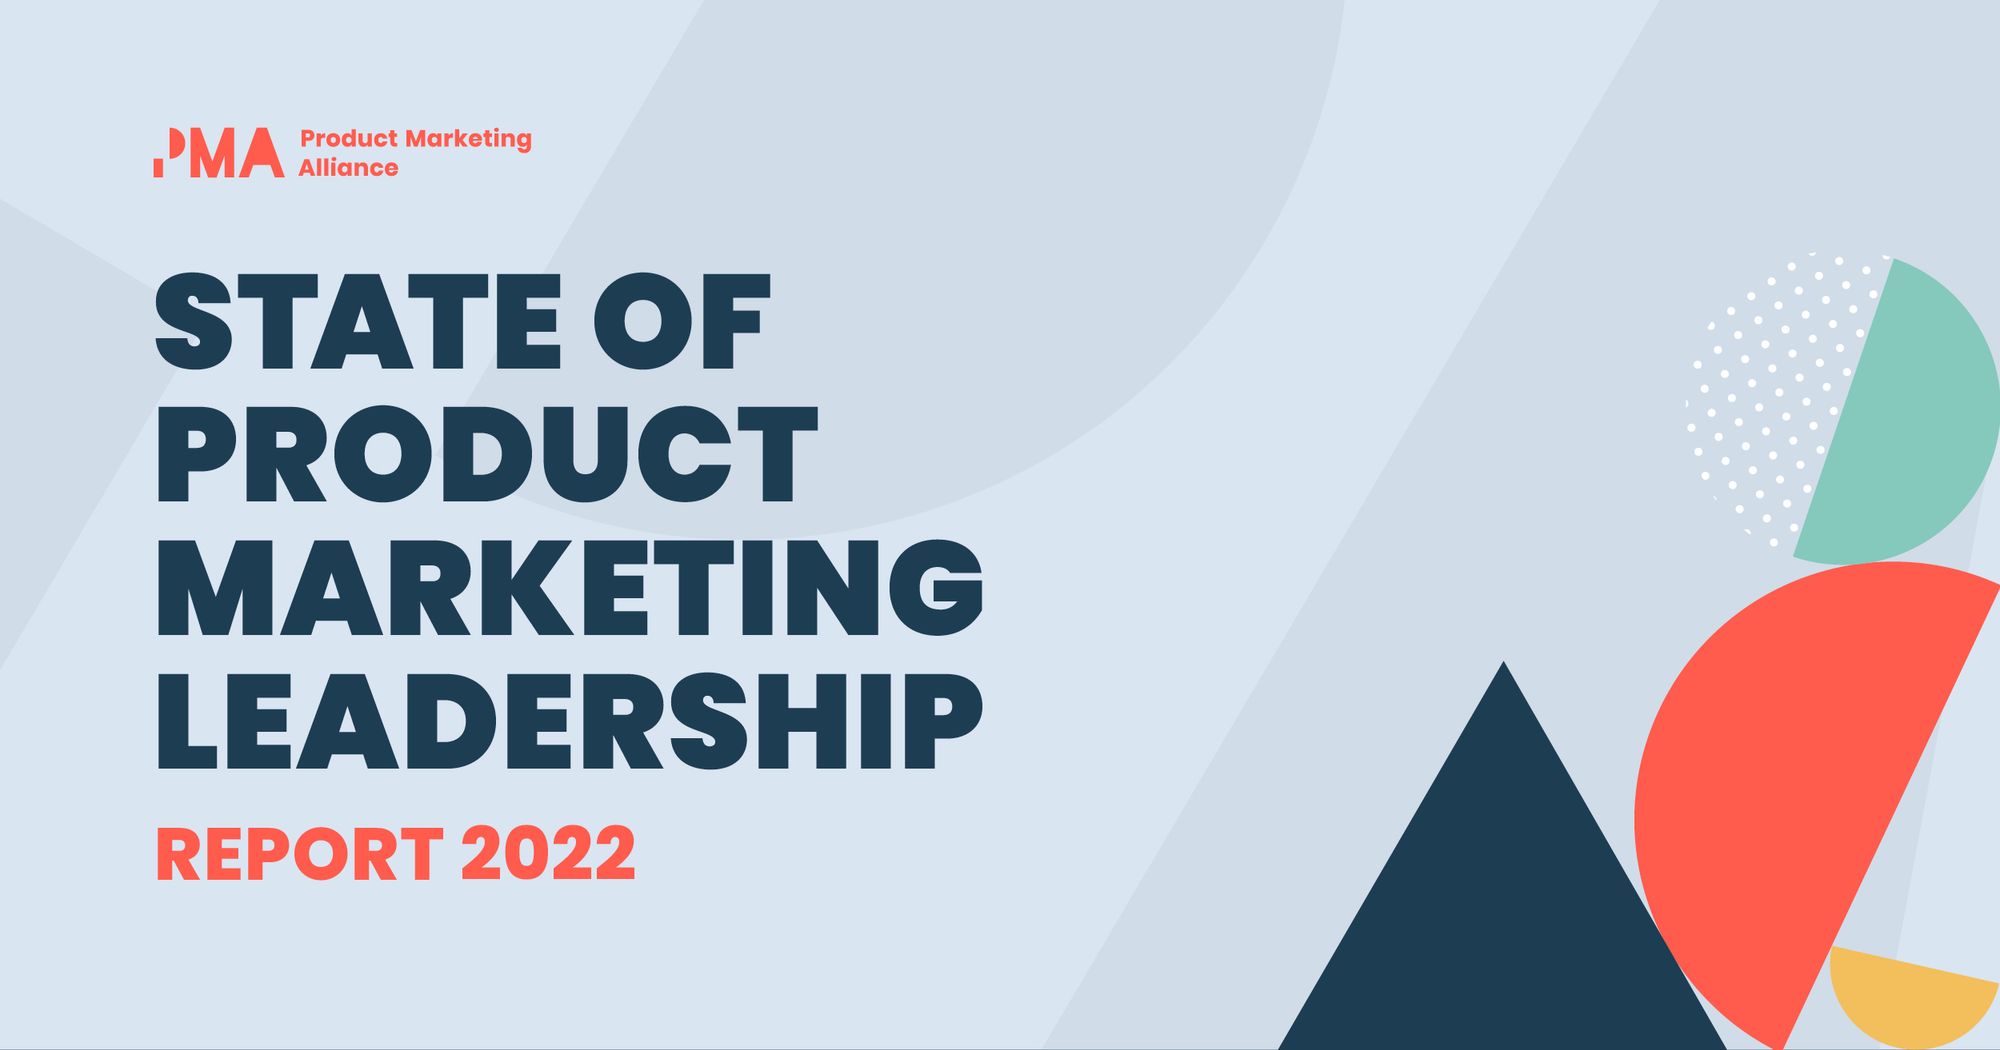 Introducing the State of Product Marketing Leadership 2022 survey